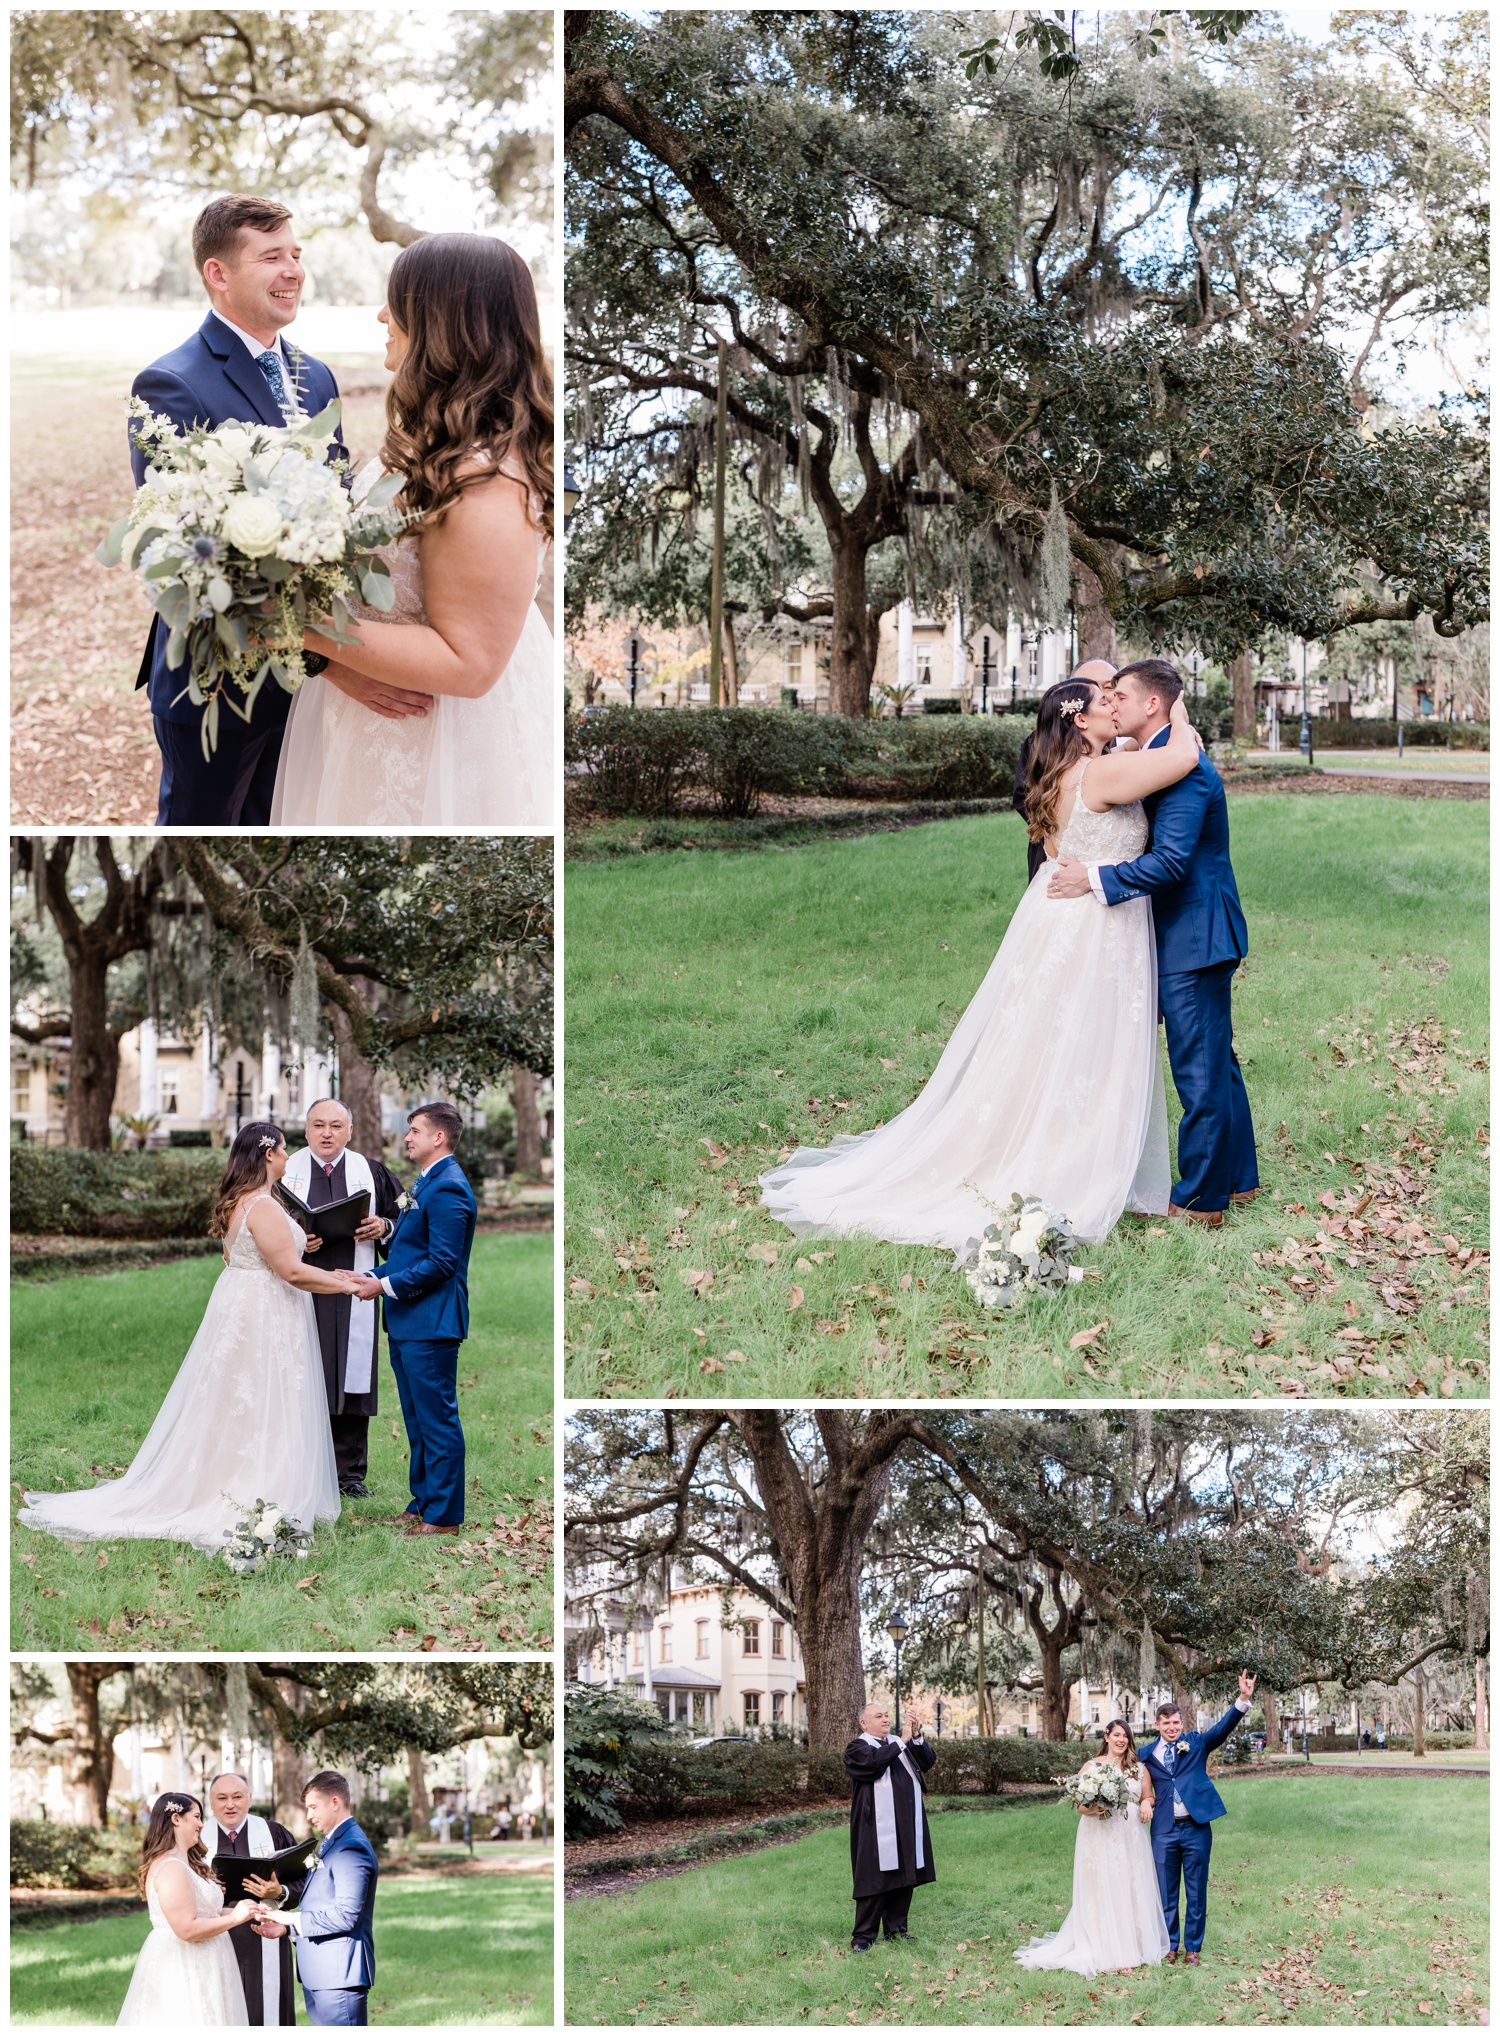 An Under the Oaks Elopement - officiating by Reverend Joe - flowers by ivory and beau